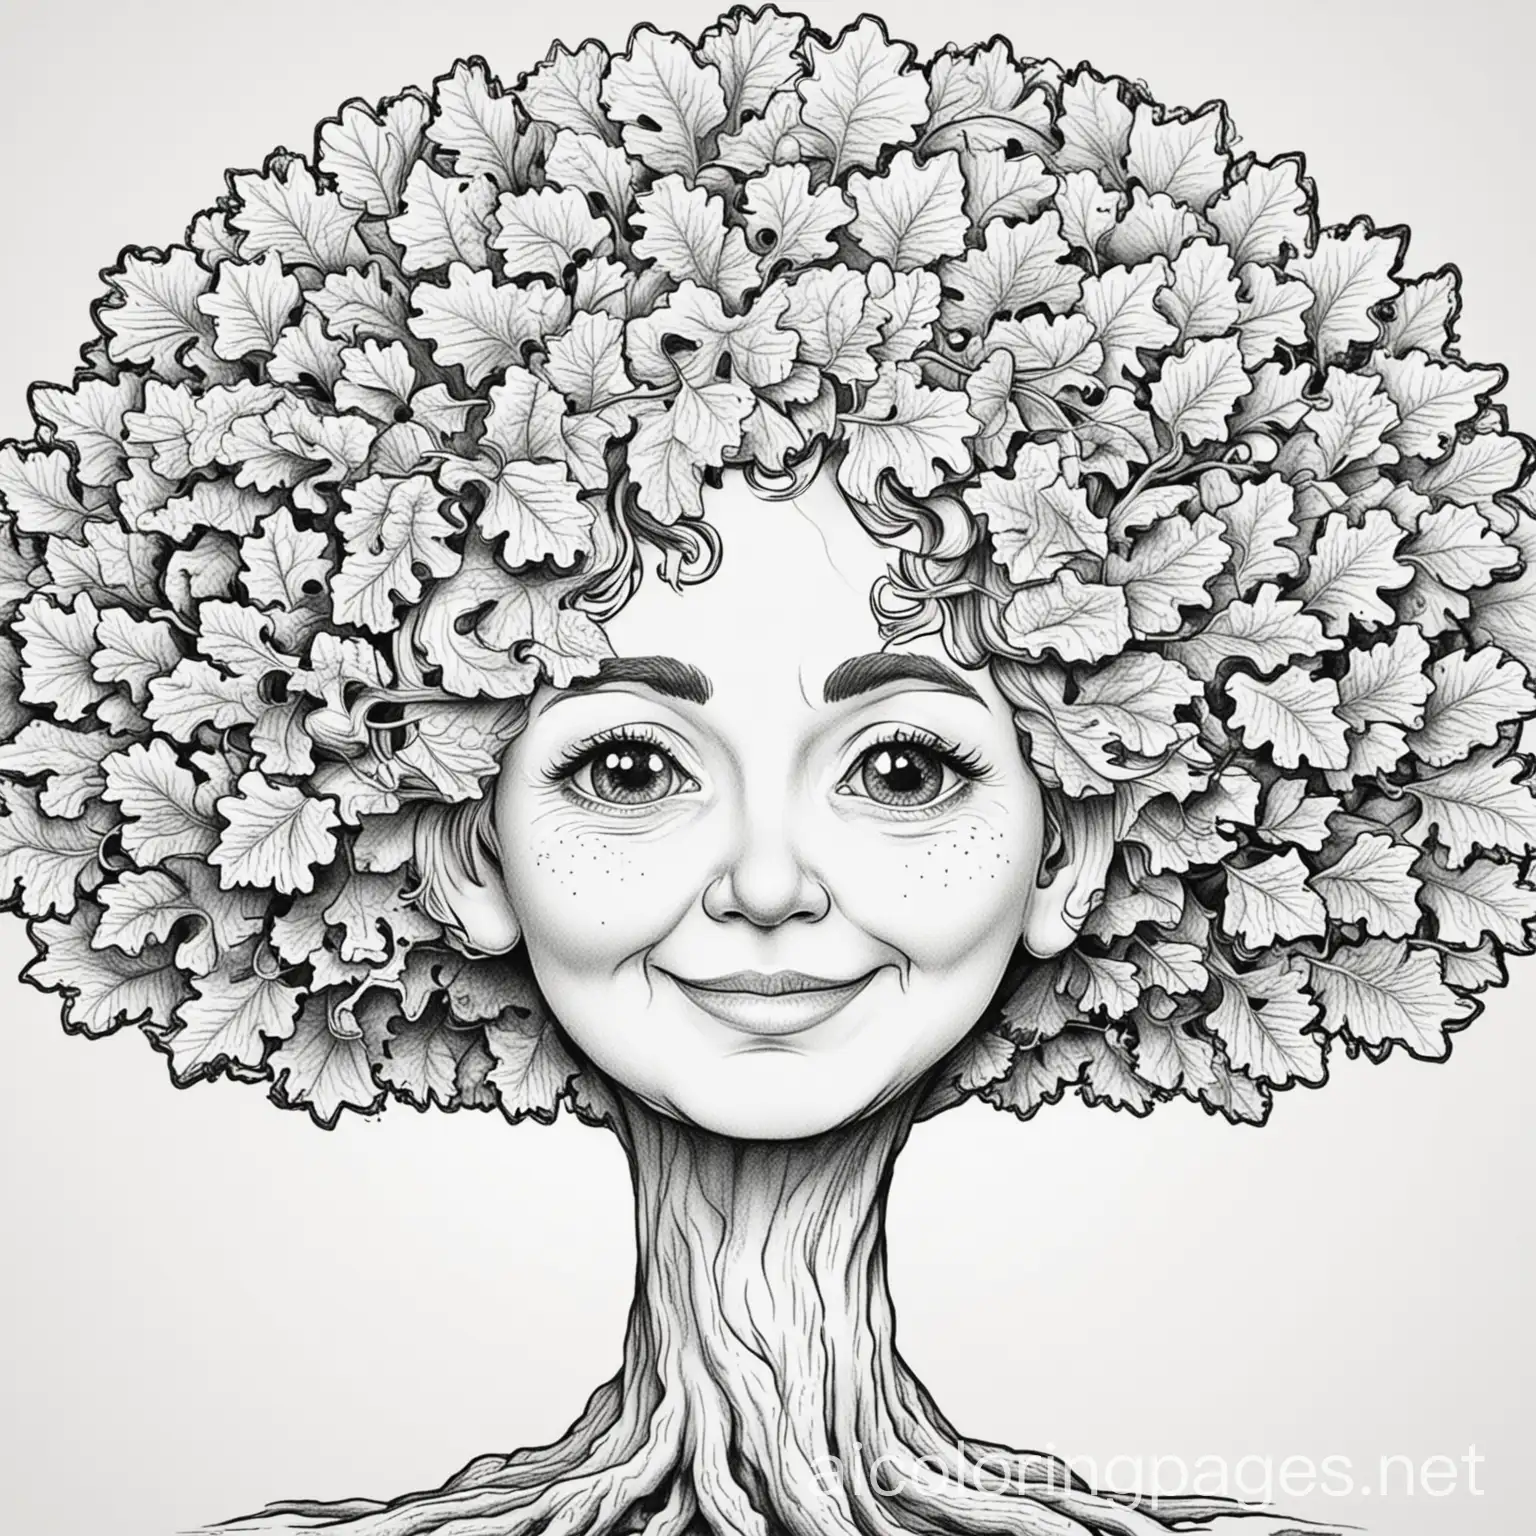 oak tree with a friendly grandmother face to color in for children

, Coloring Page, black and white, line art, white background, Simplicity, Ample White Space. The background of the coloring page is plain white to make it easy for young children to color within the lines. The outlines of all the subjects are easy to distinguish, making it simple for kids to color without too much difficulty